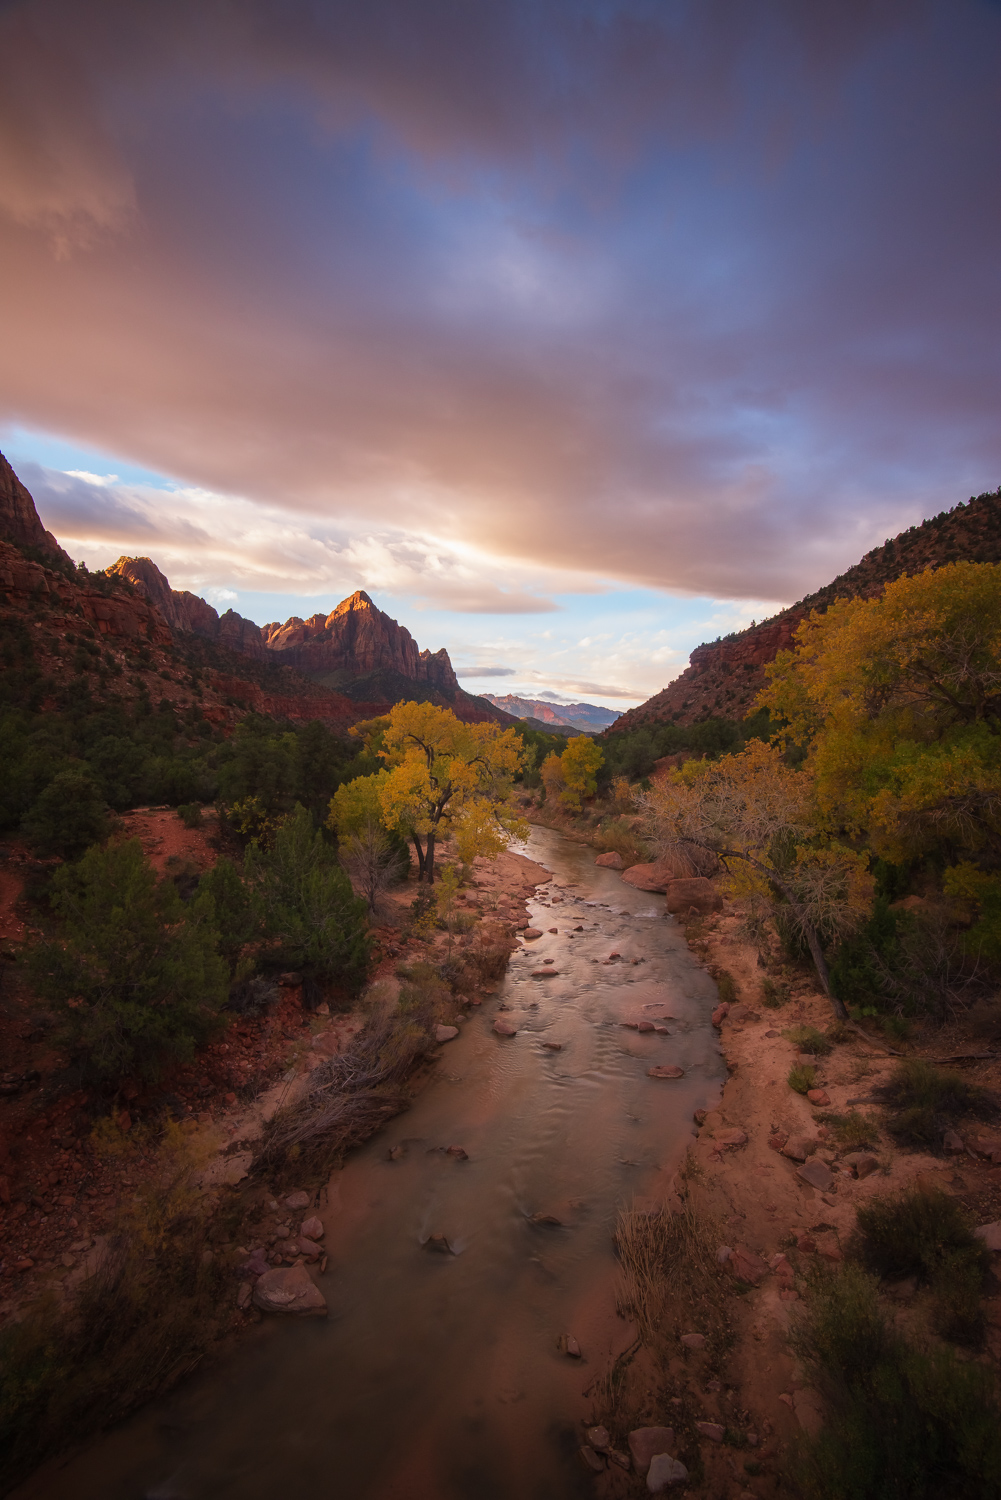 The iconic view of the Watchmen and the Virgin River, Zion National Park.